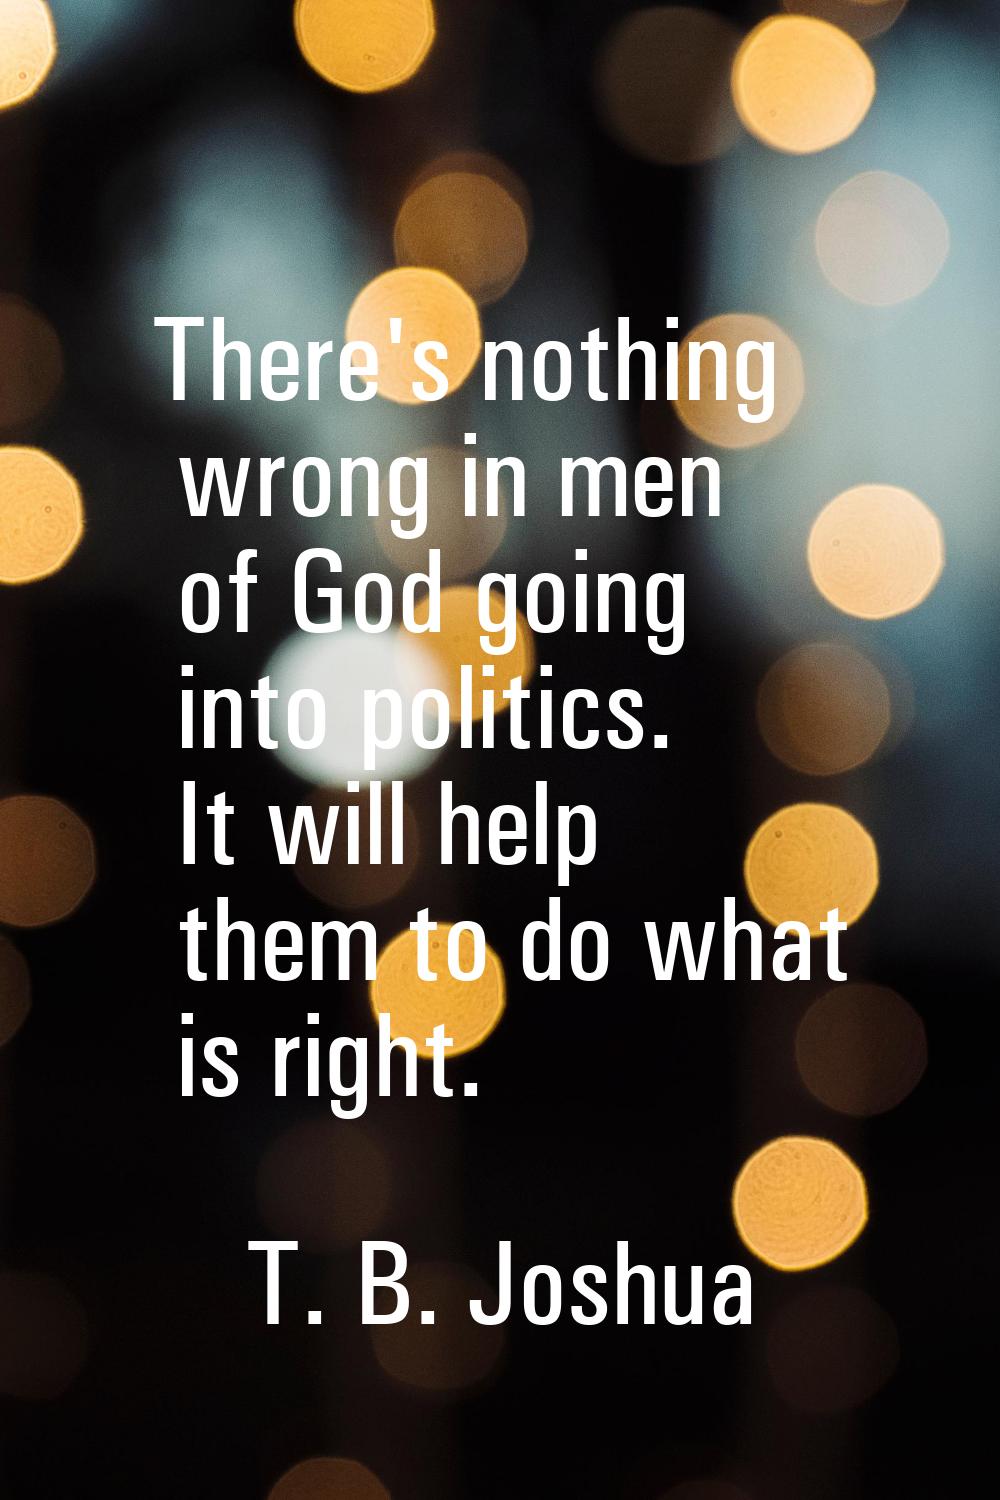 There's nothing wrong in men of God going into politics. It will help them to do what is right.